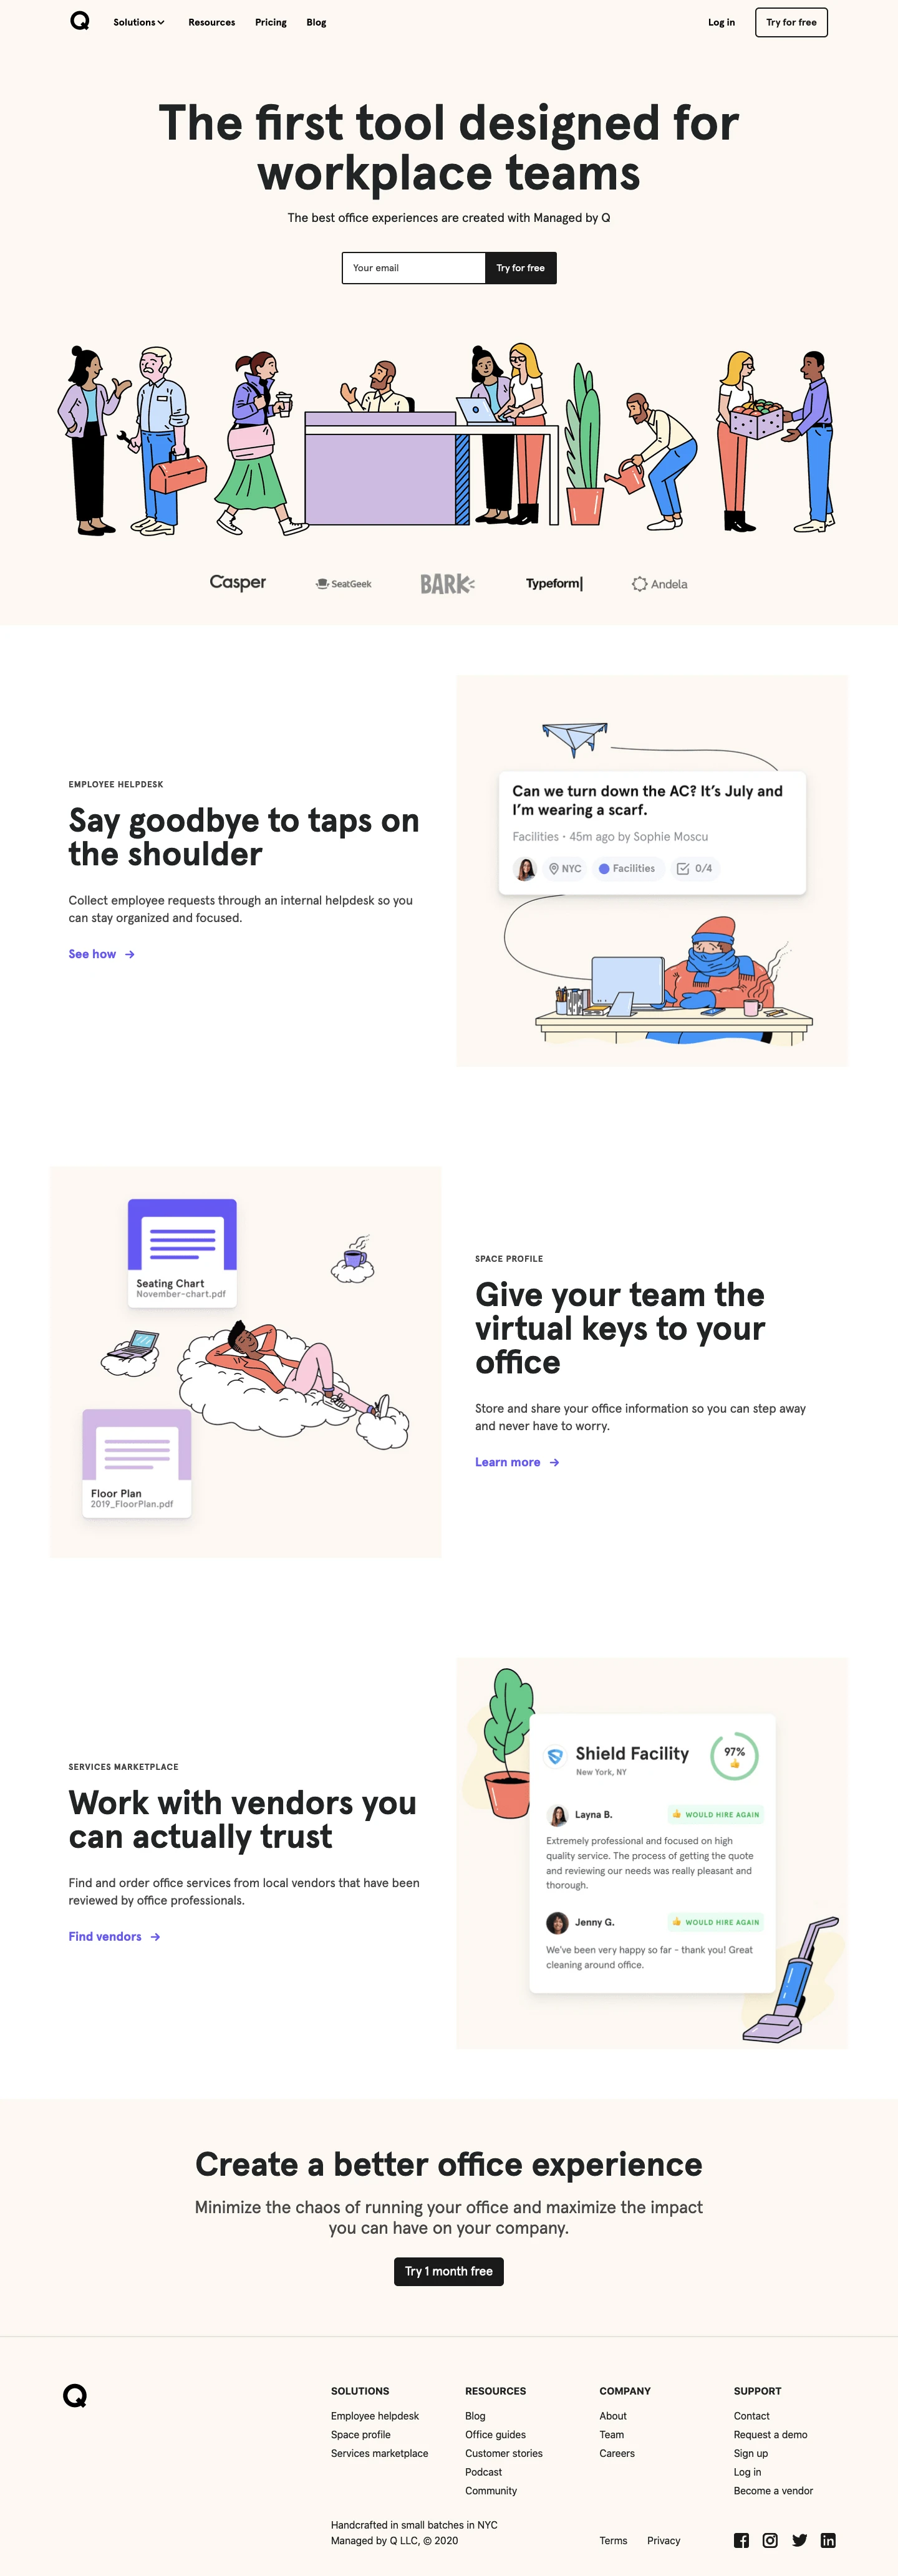 Managed by Q Landing Page Example: Managed by Q gives workplace teams office management software that helps them with every aspect of their job so they can be more productive and deliver an impactful office experience.